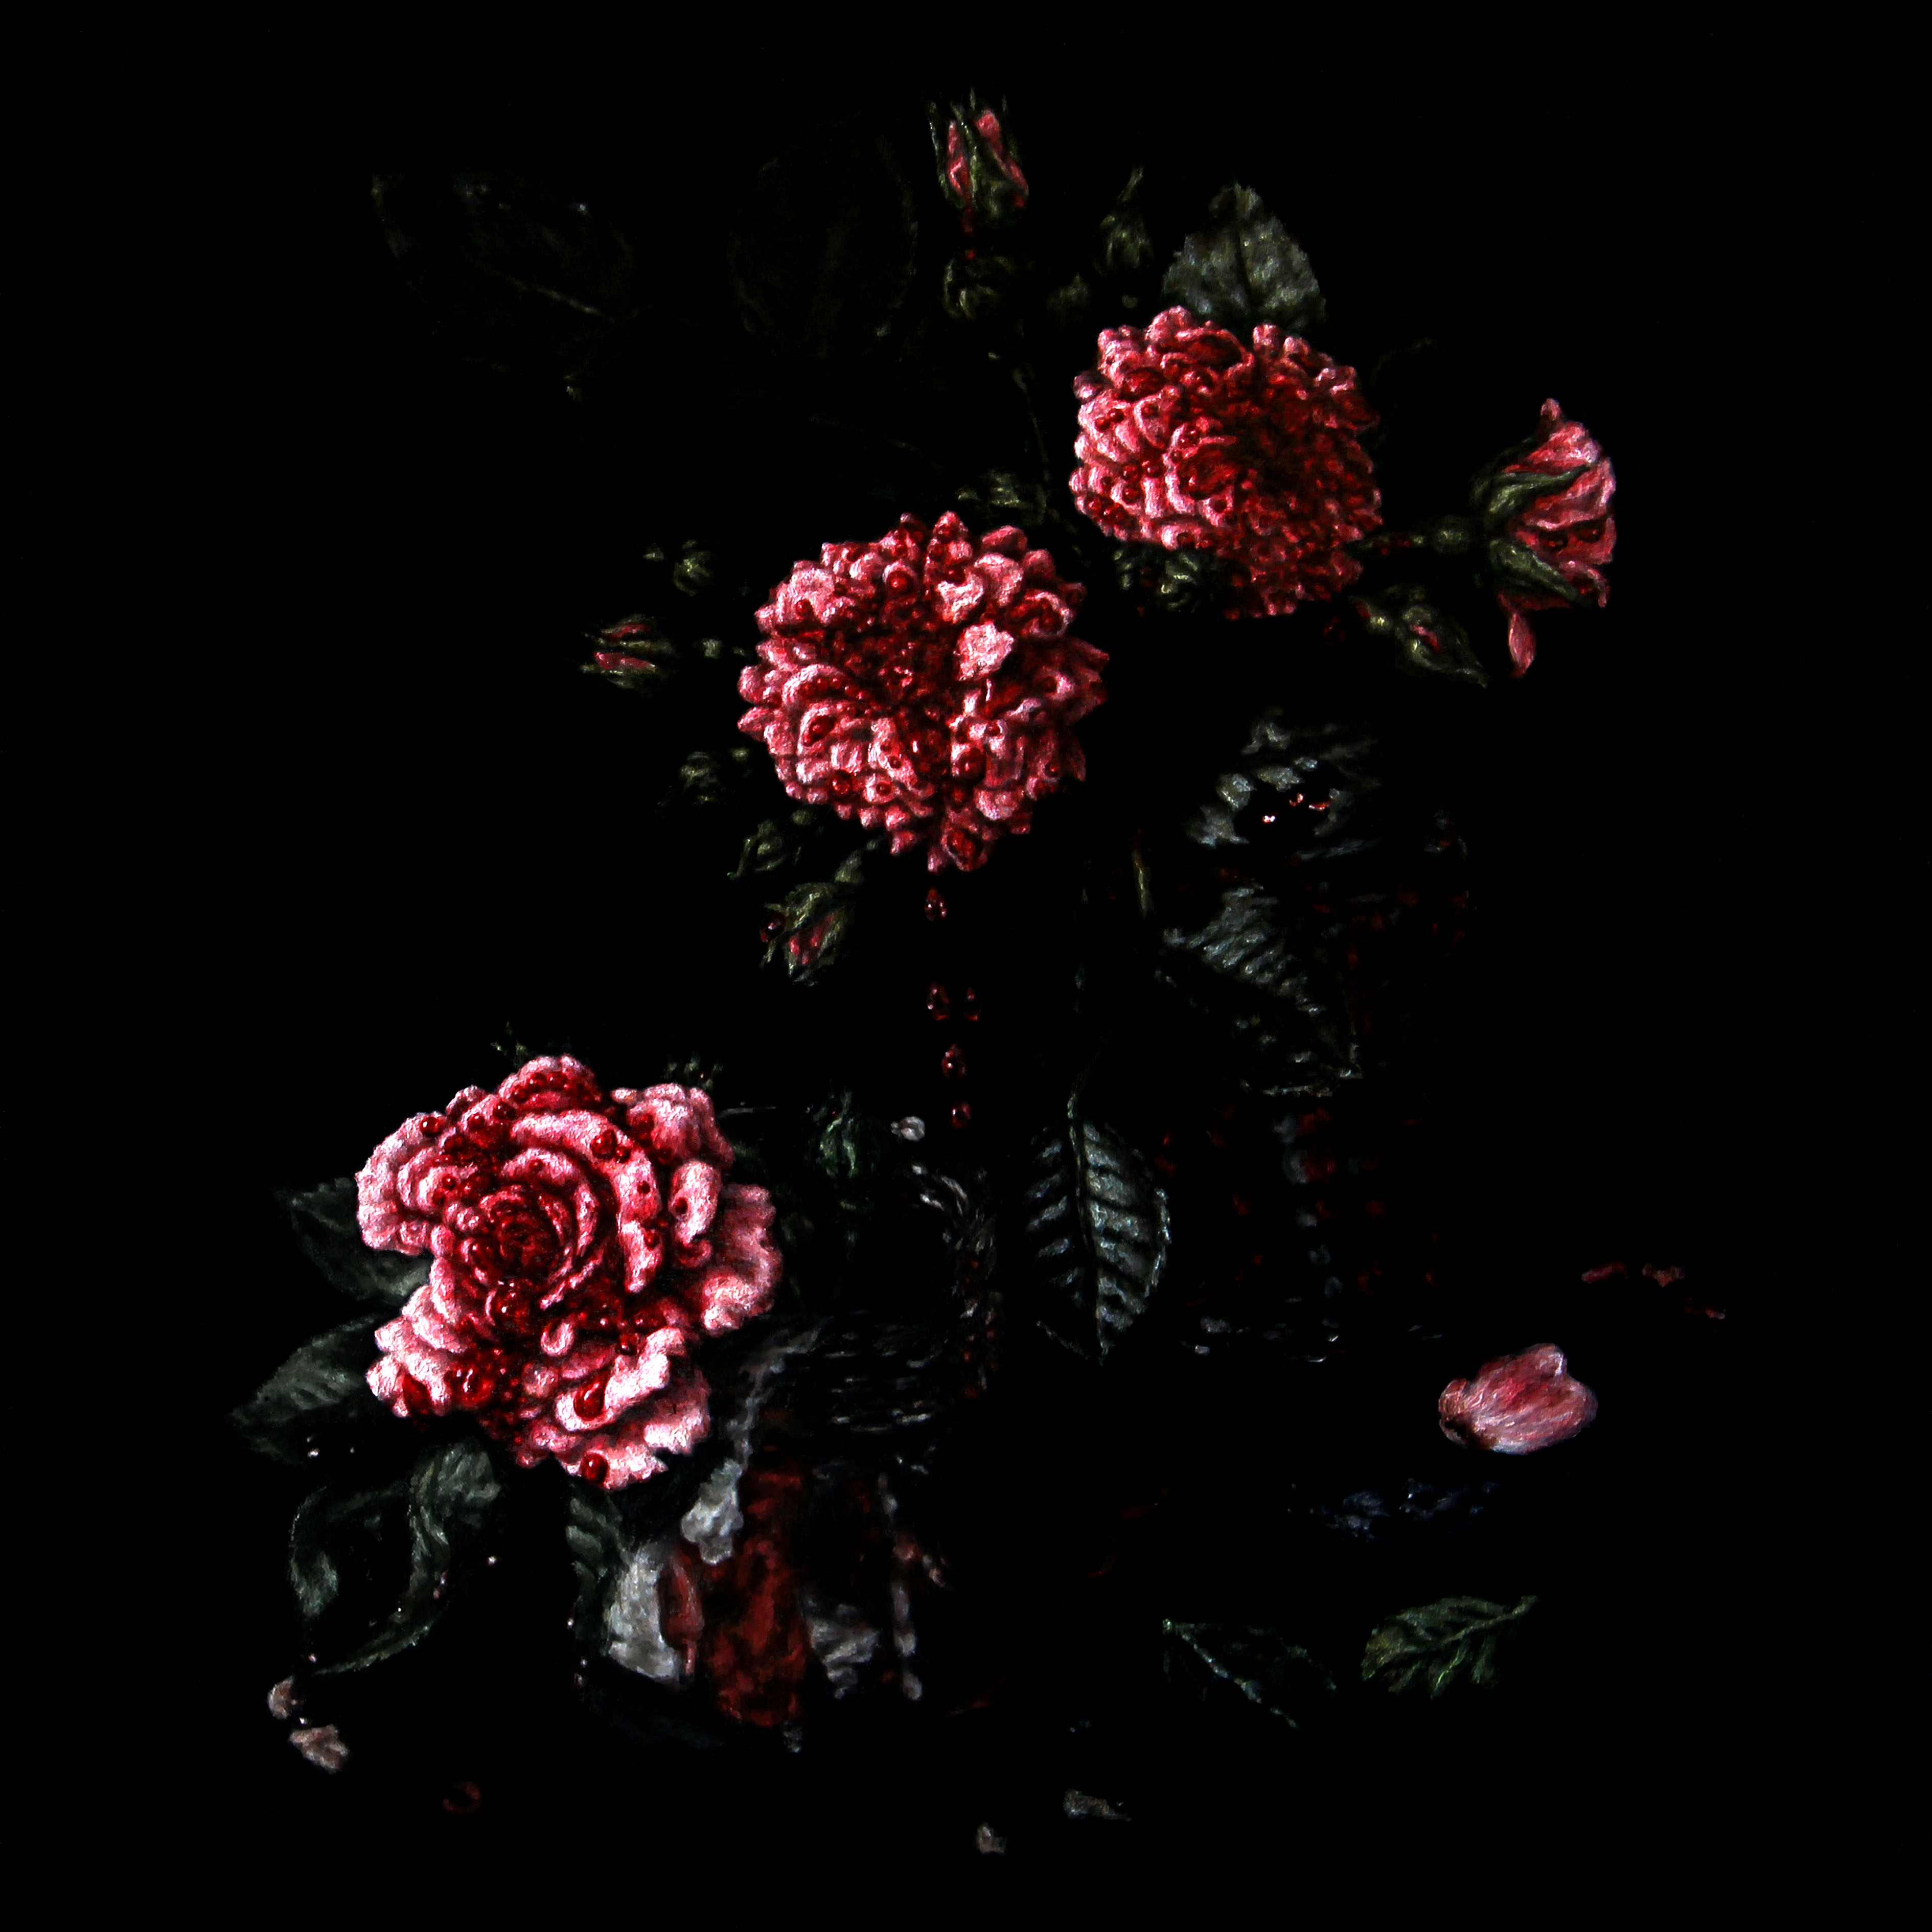 Painting in classical style of pink roses on a black background. There are blood drops emerging from the centre of the roses.